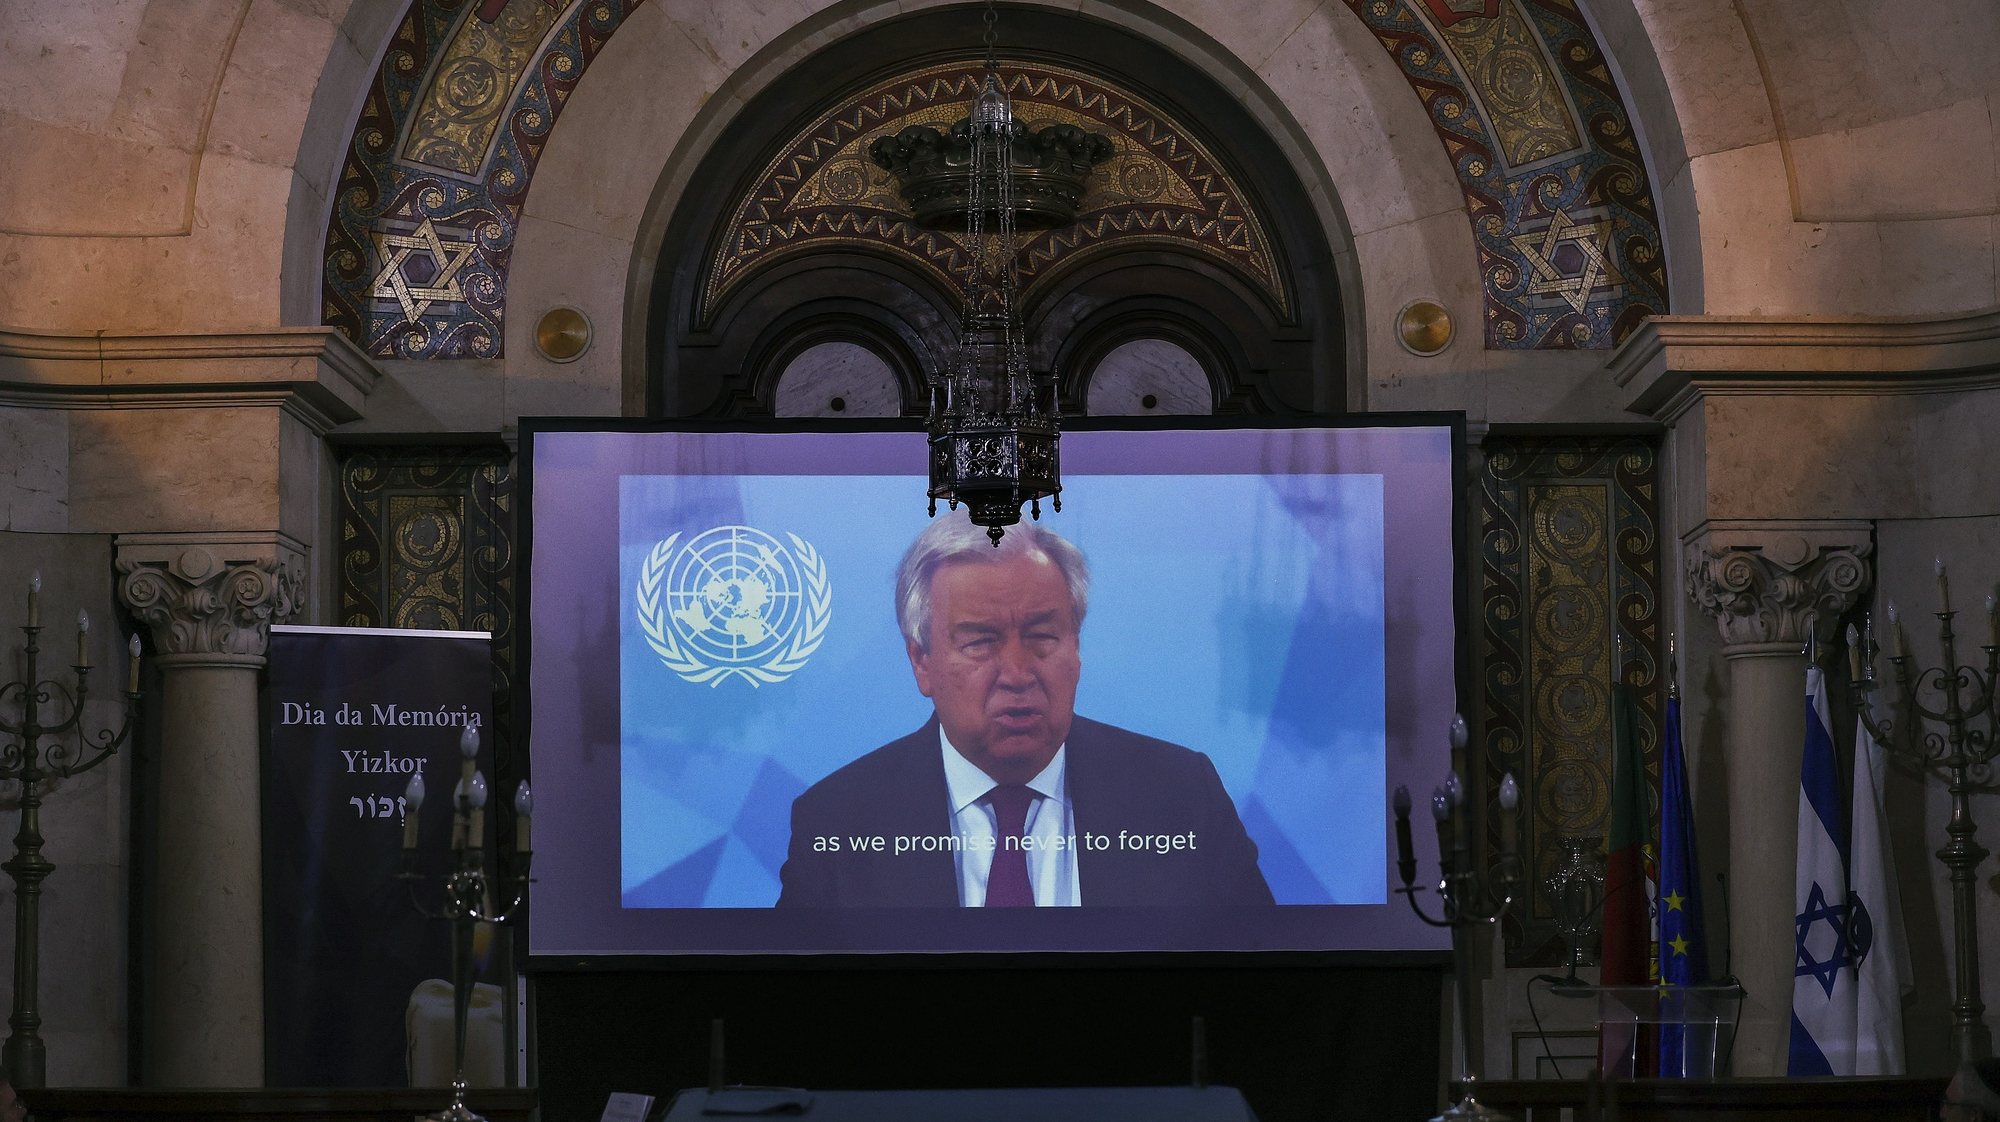 epa11118786 UN secretary general Antonio Guterres delivers a video speech to mark the International Holocaust Remembrance Day commemorating the victims of the Holocaust, and to promote the primacy of the values of freedom, tolerance, respect, democracy and peace in the fight against antisemitism, in the Lisbon Sinagogue, Portugal, 01 February 2024. The Israeli Community of Lisbon (CIL) holds this ceremony in collaboration with the Israeli Embassy in Portugal, with brief speeches by the president of CIL, the rabbi and the Israeli ambassador to Portugal. International Holocaust Remembrance Day is commemorated annually on 27 January.  EPA/MANUEL DE ALMEIDA